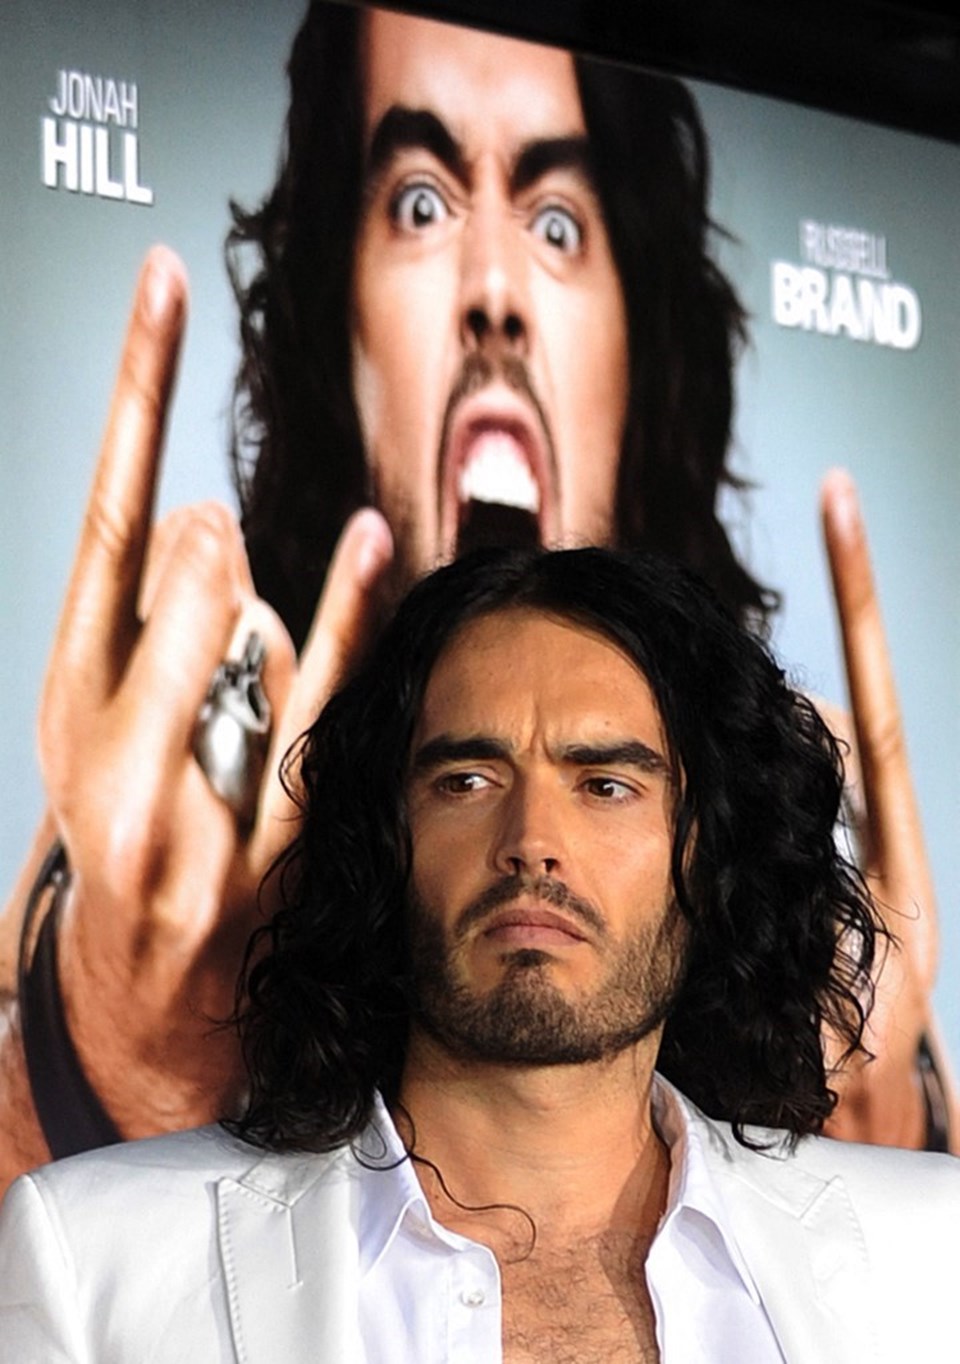 Allegations of rape and harassment against Russell Brand - 2